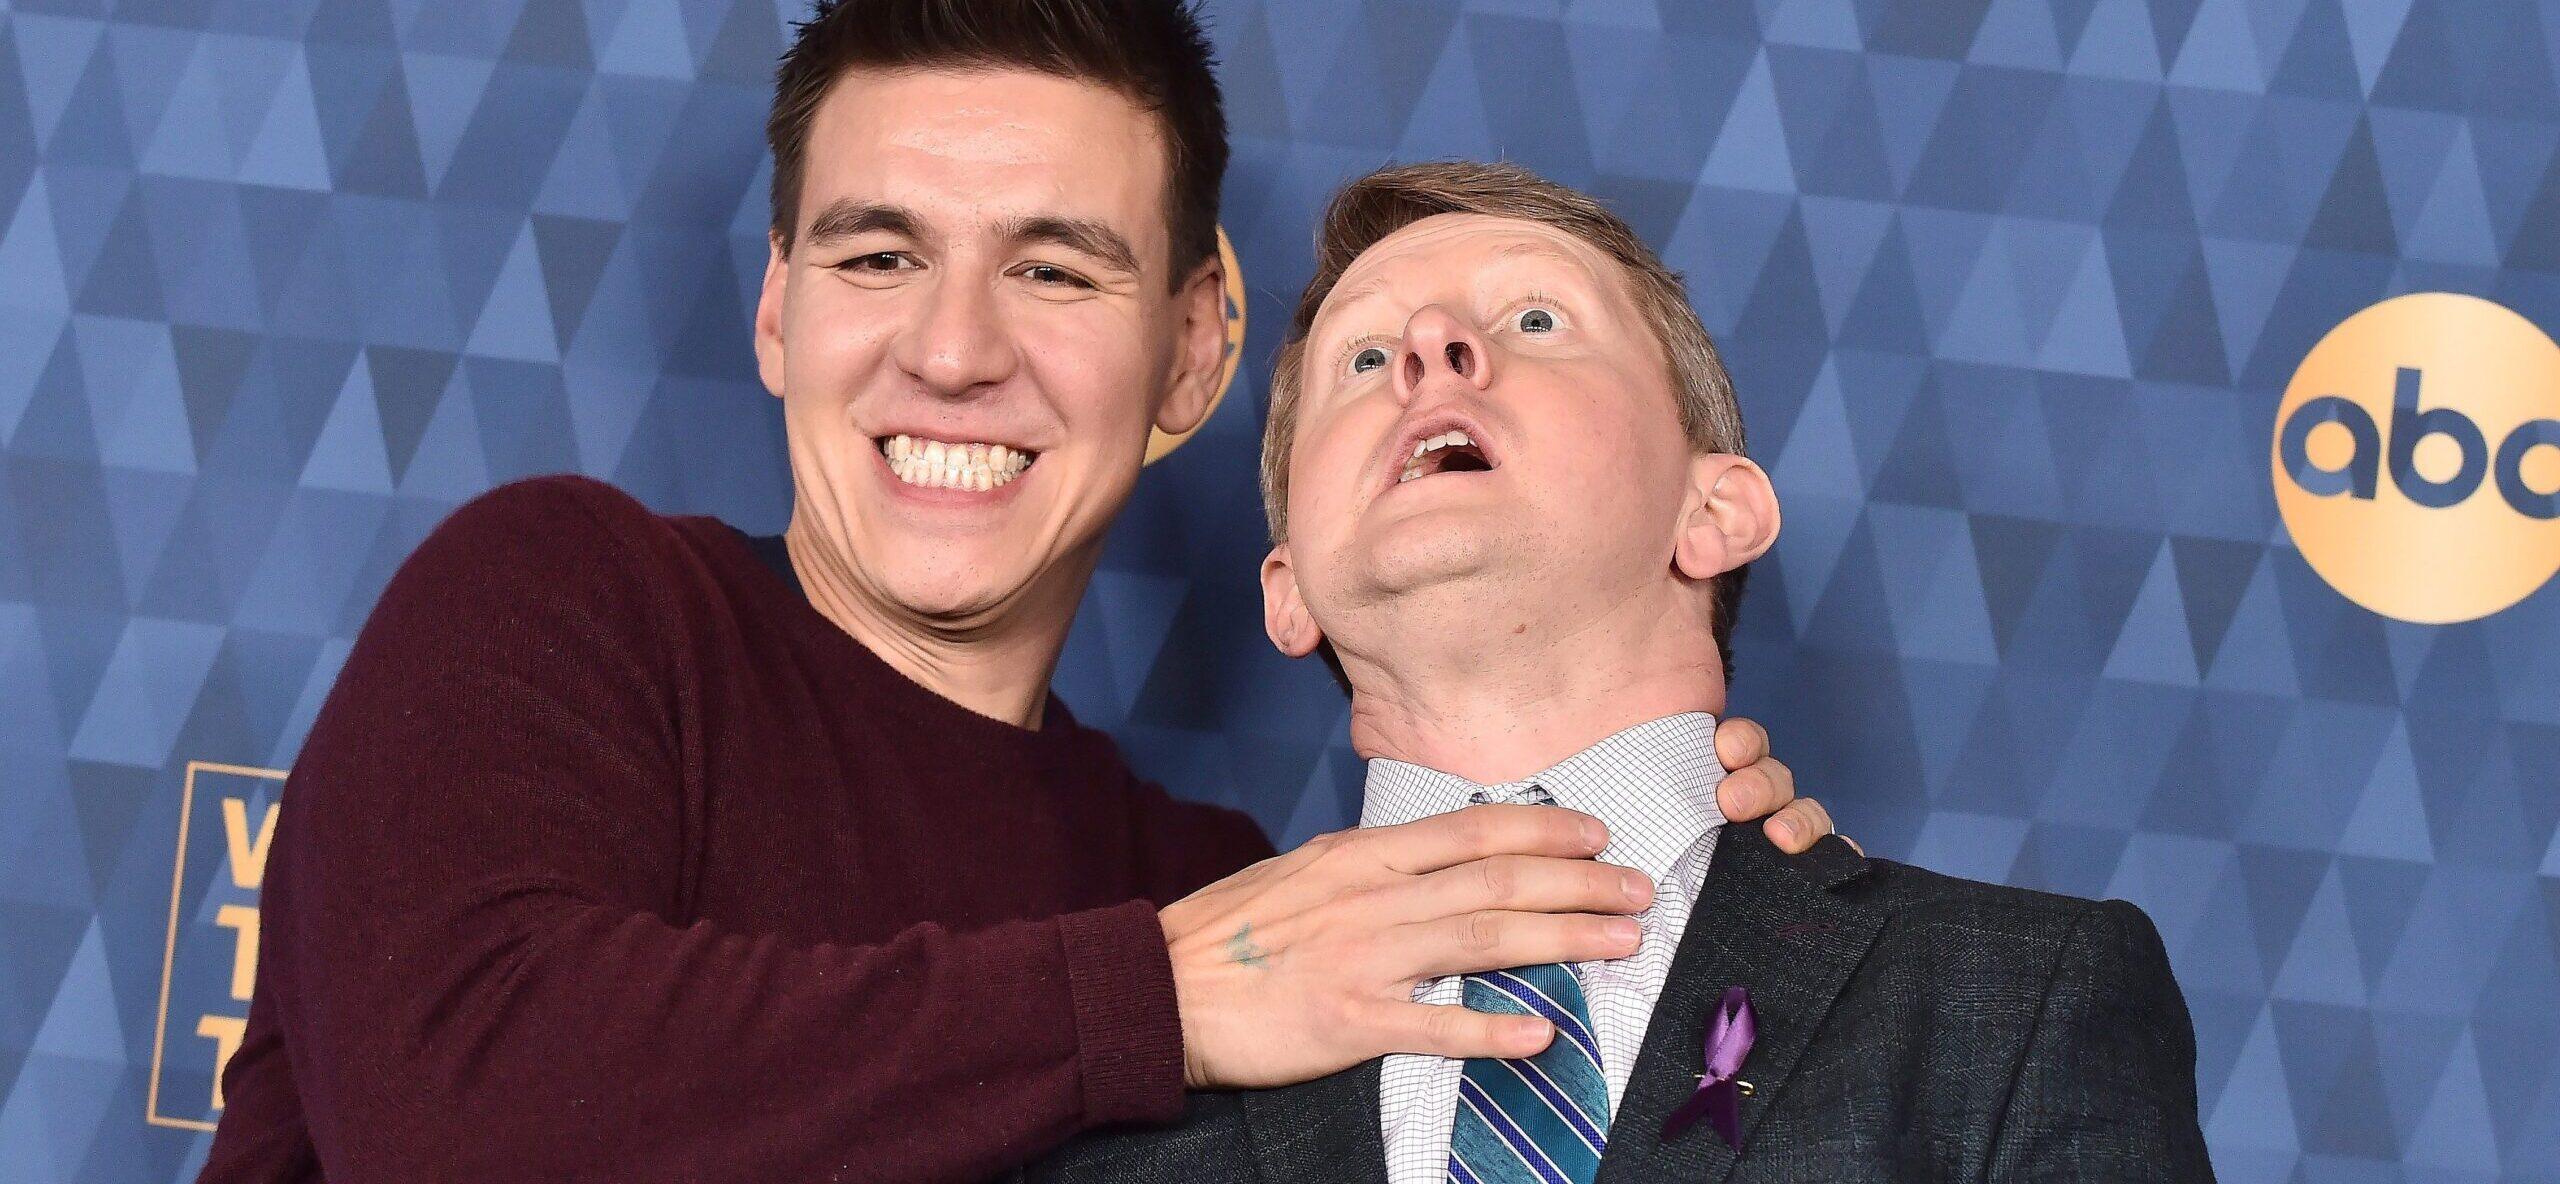 'Jeopardy!' Host Ken Jennings Reveals Why He Won't Give James Holzhauer A Rematch